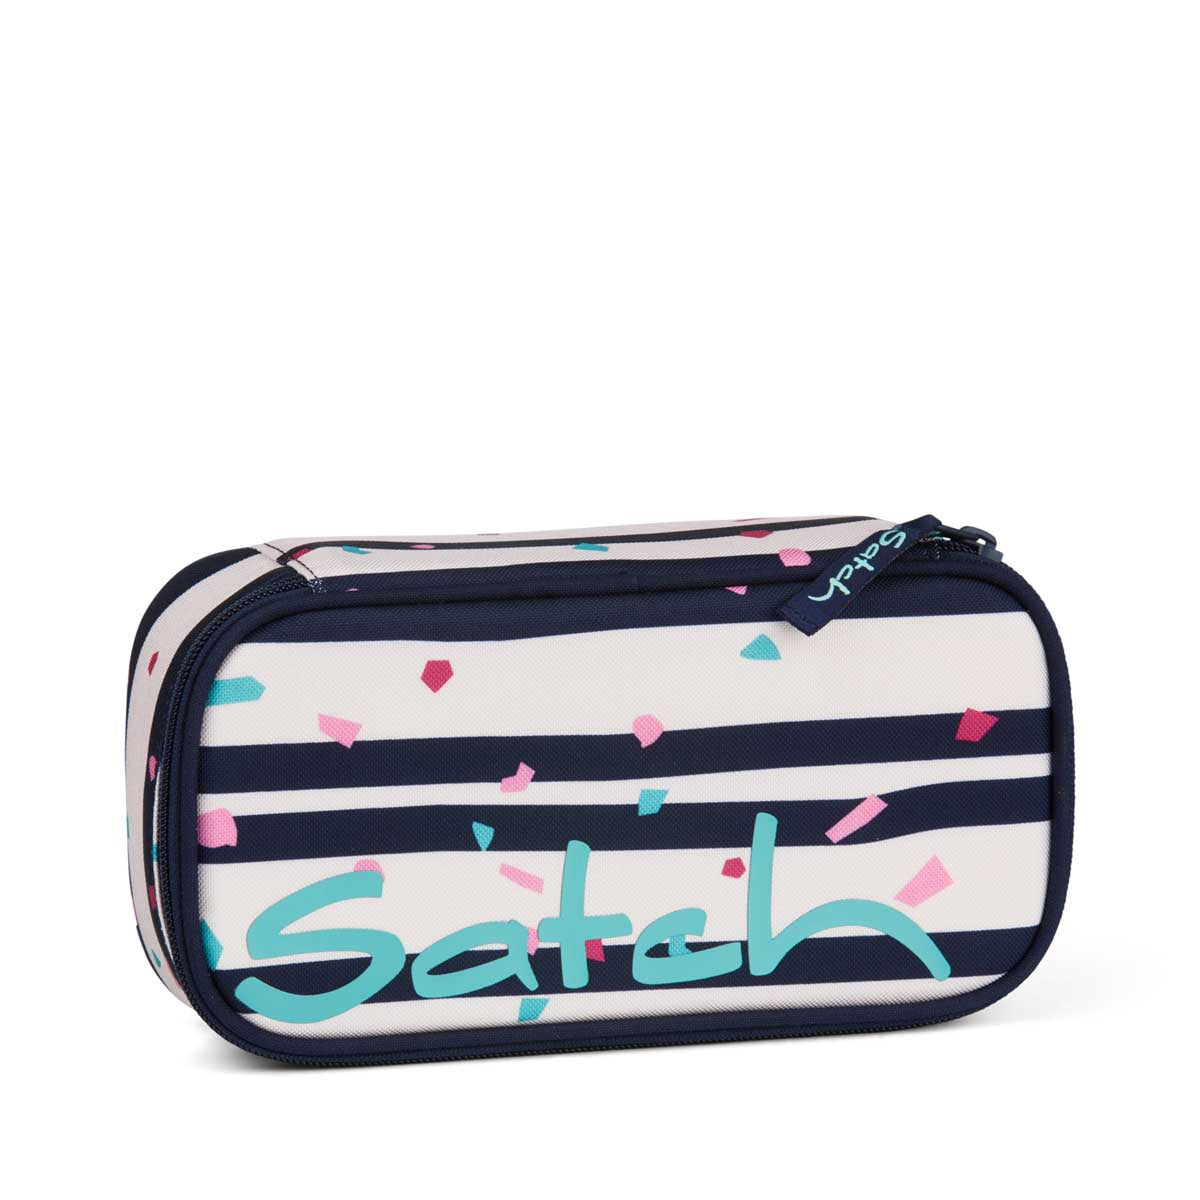 Satch Schlamperbox Pencil Box Happy Flakes